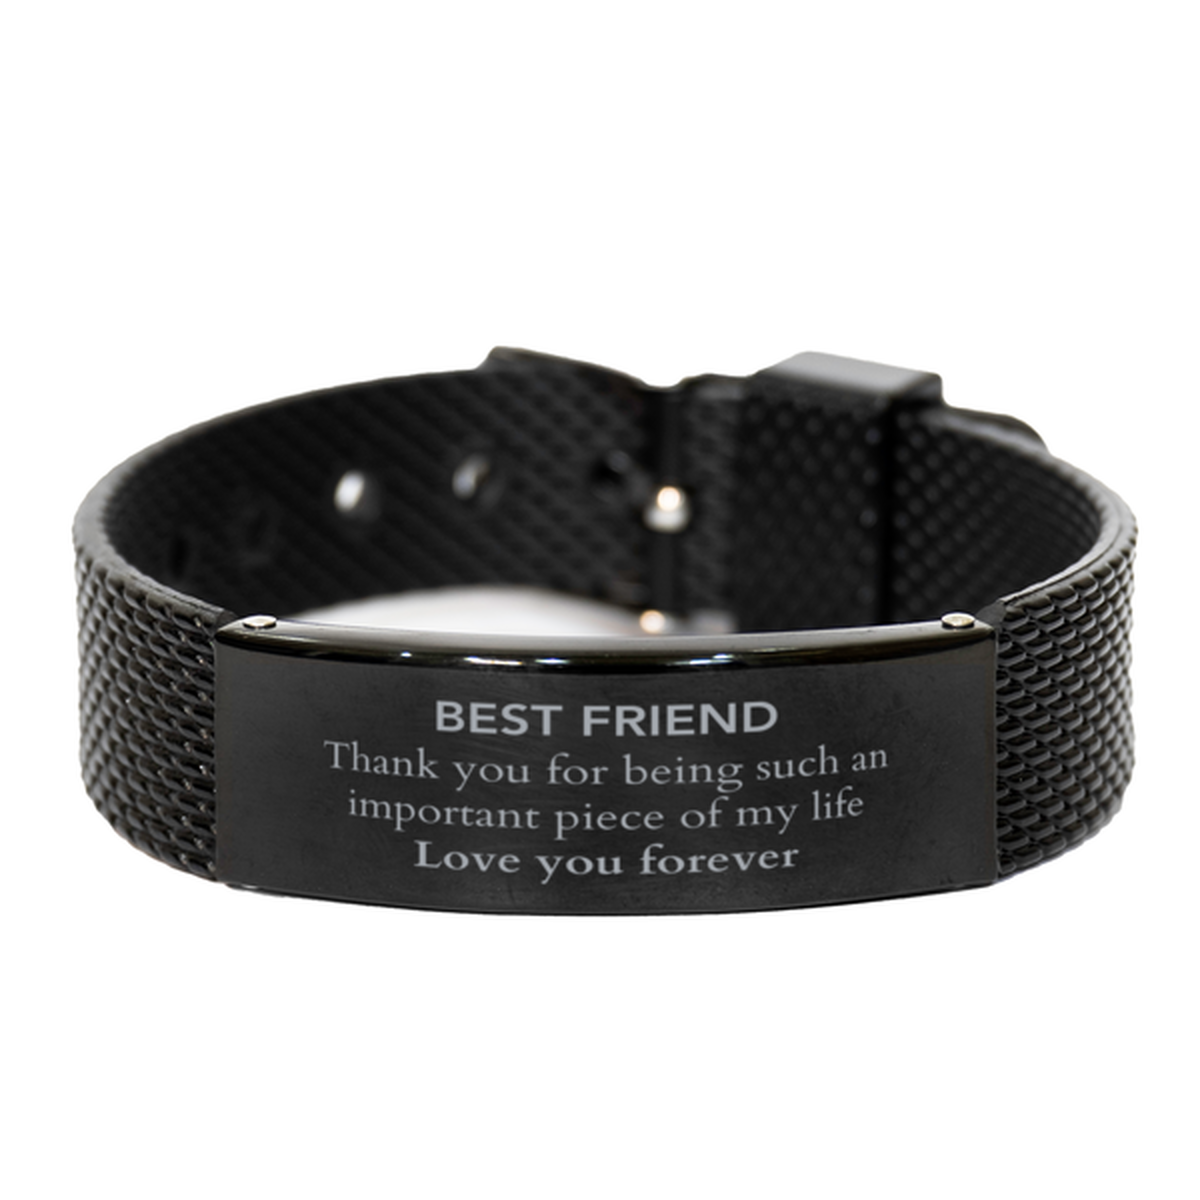 Appropriate Best Friend Black Shark Mesh Bracelet Epic Birthday Gifts for Best Friend Thank you for being such an important piece of my life Best Friend Christmas Mothers Fathers Day